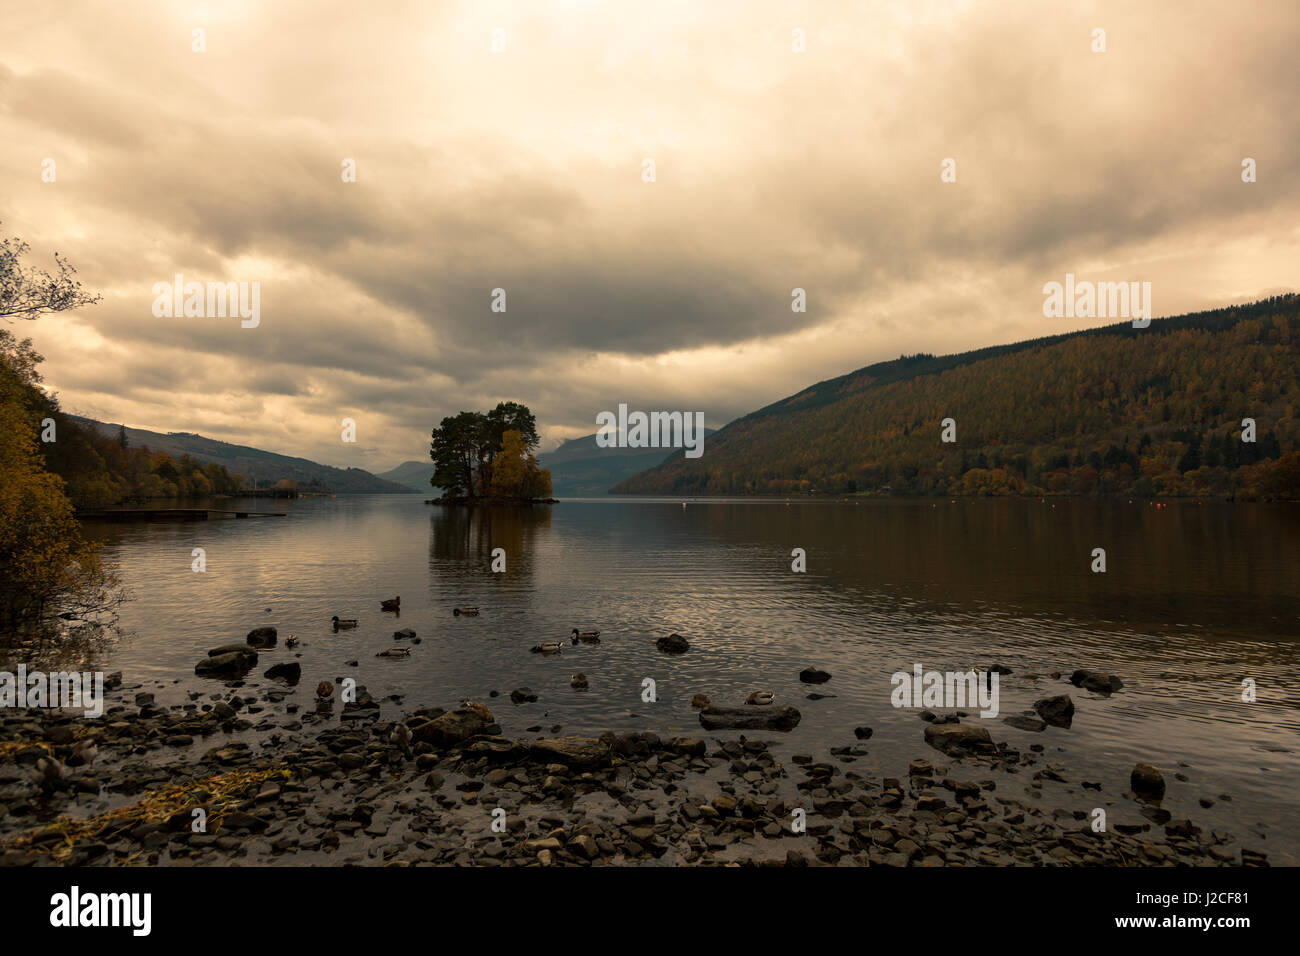 A crannog and an island of trees on the still water of Loch Tay at sunset as some ducks play on the shore. Kenmore, Perthshire, Scotland. Stock Photo